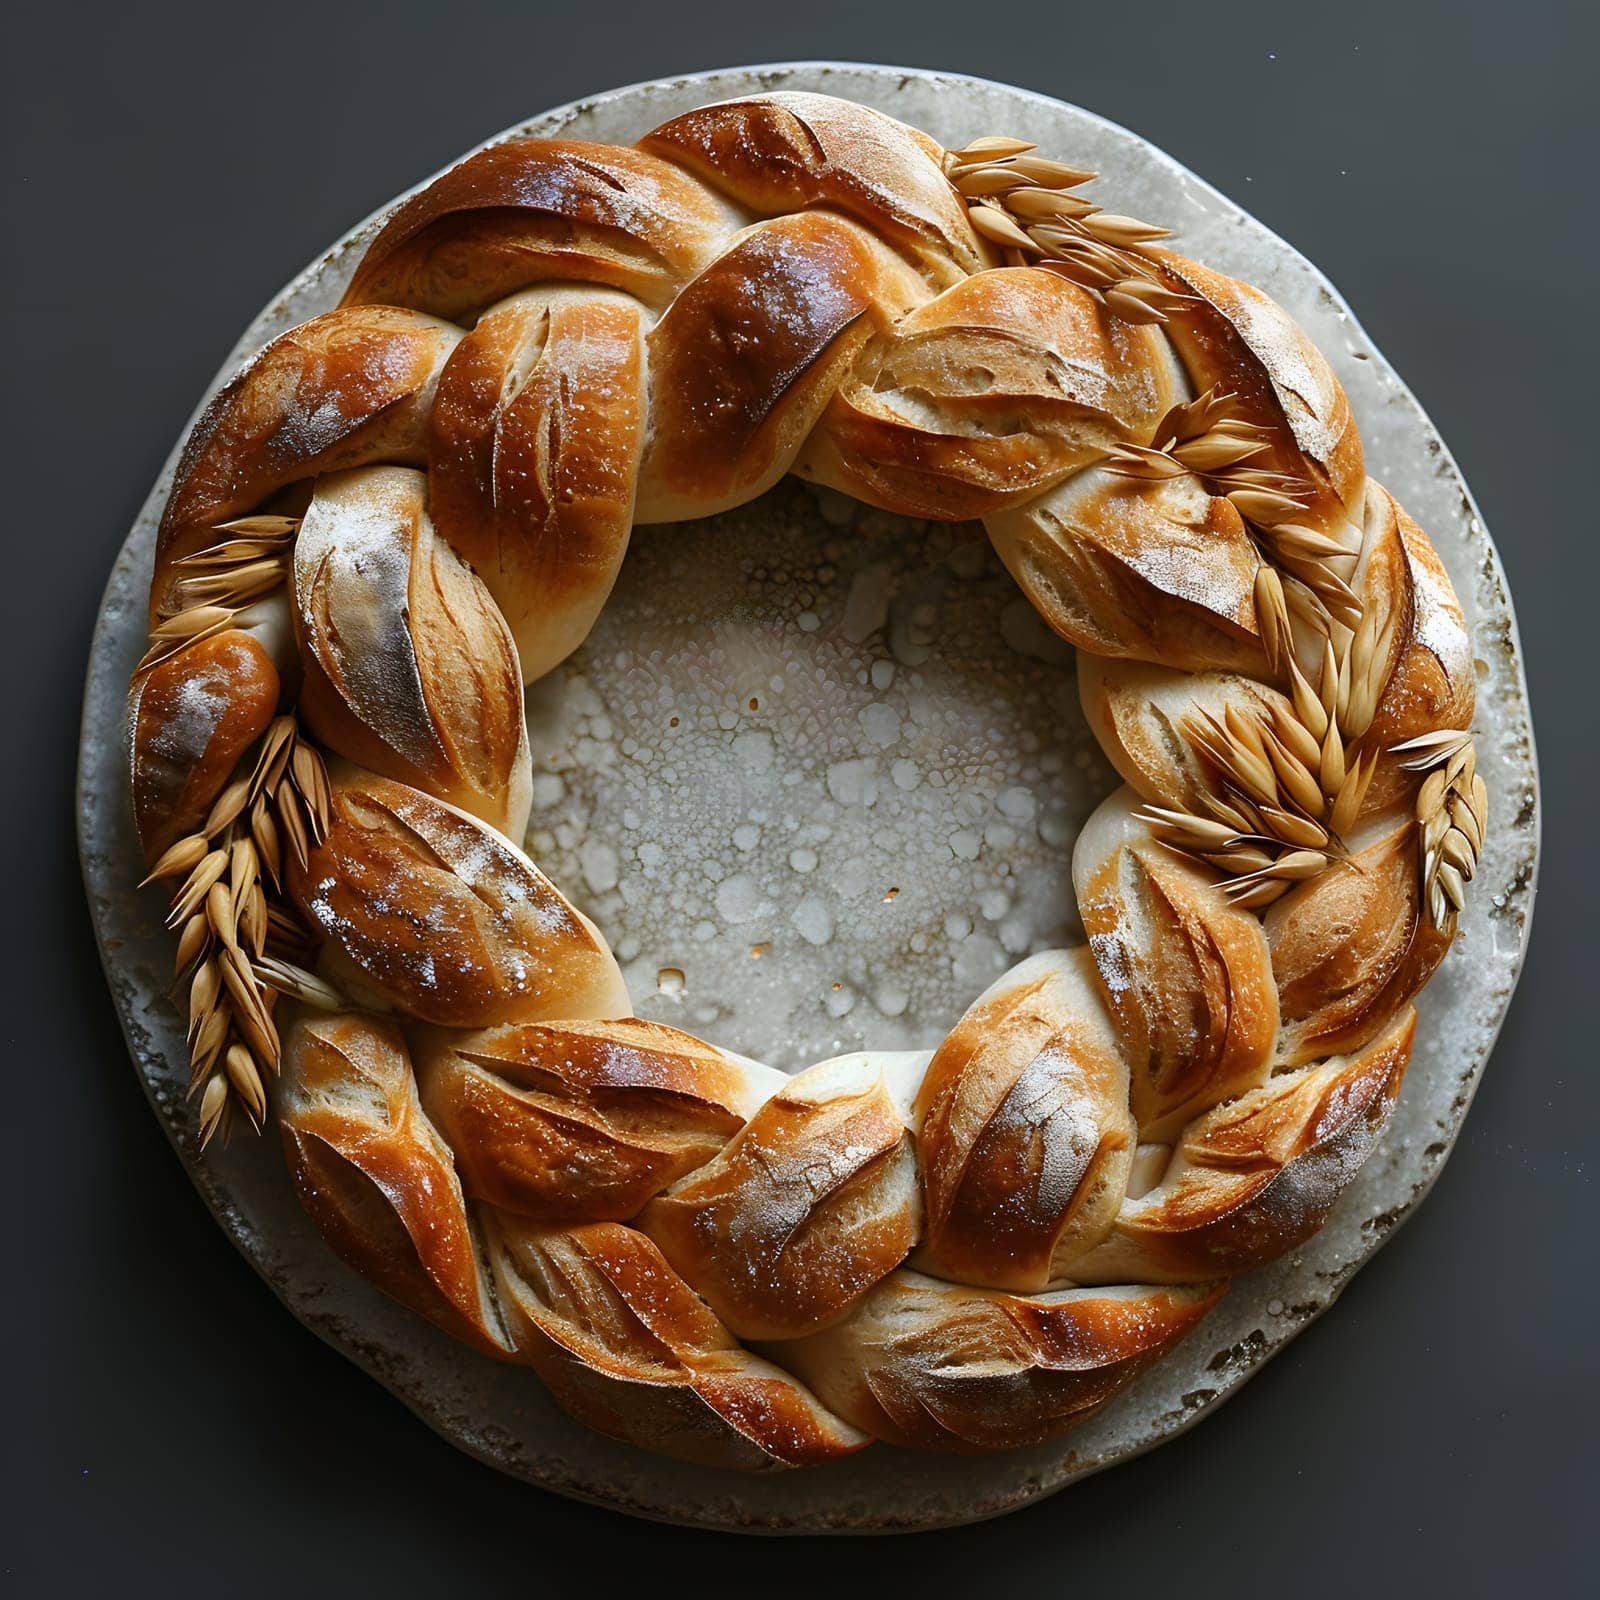 A staple food dish made of baked goods, a wreath of bread served on a plate with a black background. The serveware contrasts with the fashion accessory of the metal plate